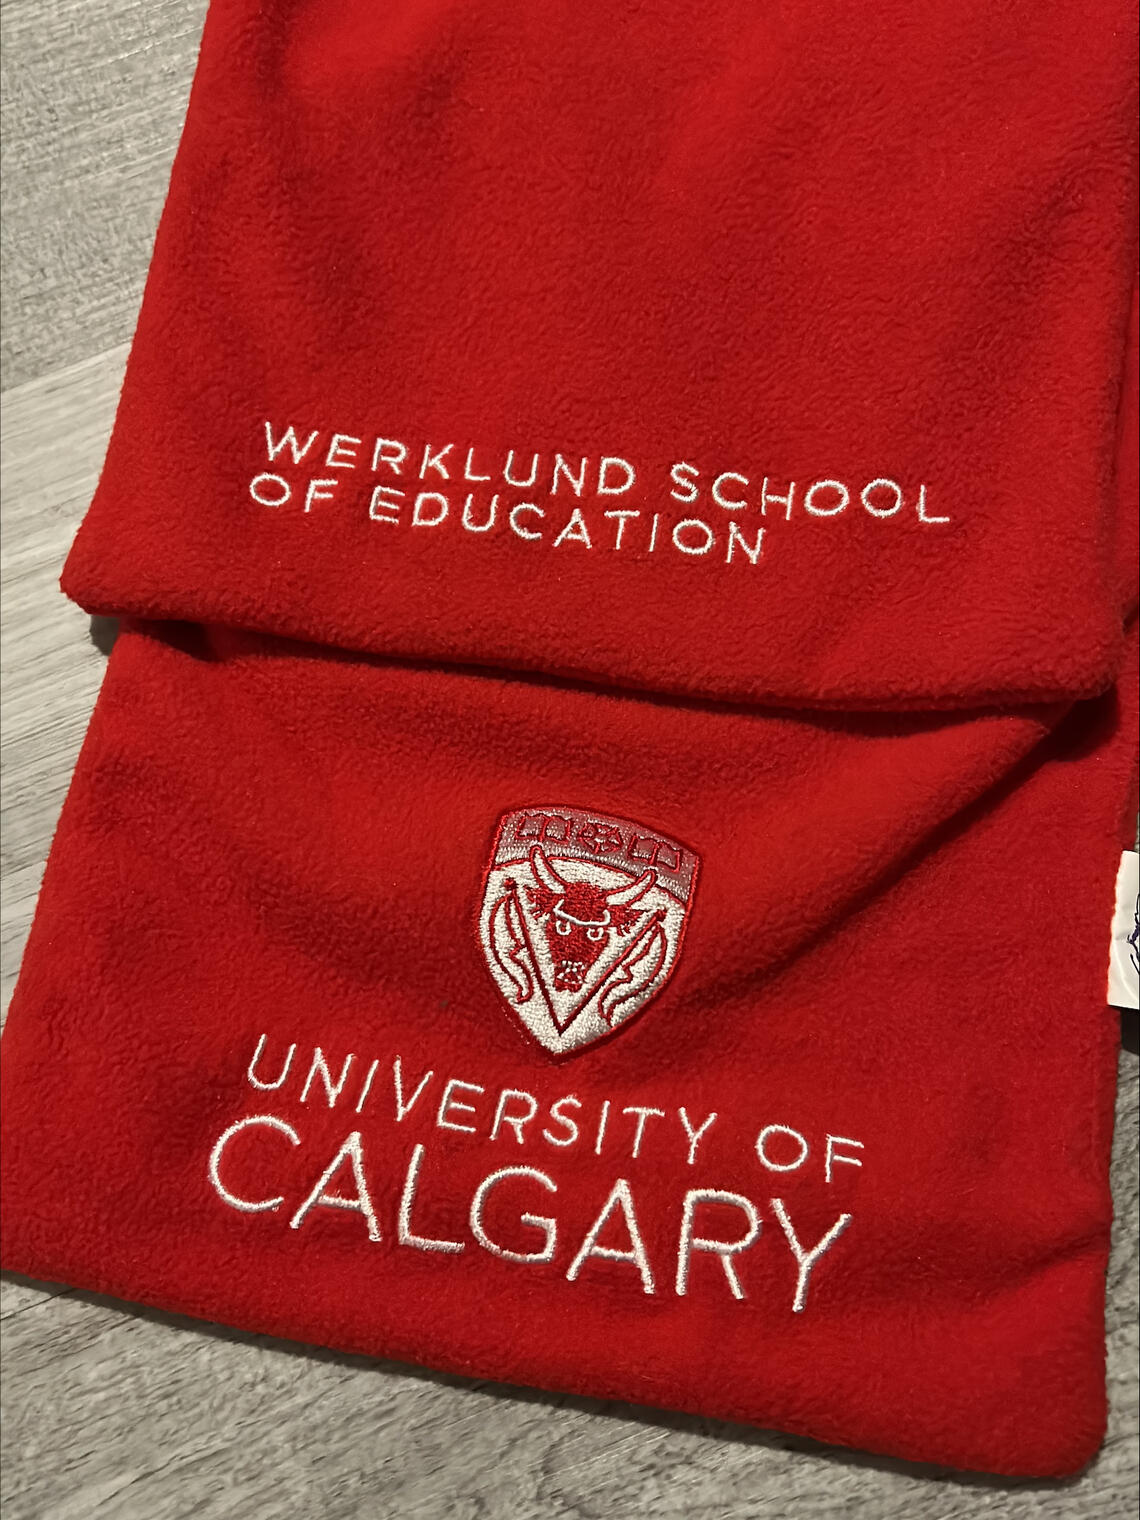 red scard branded with UCalgary's Werklund School of Education